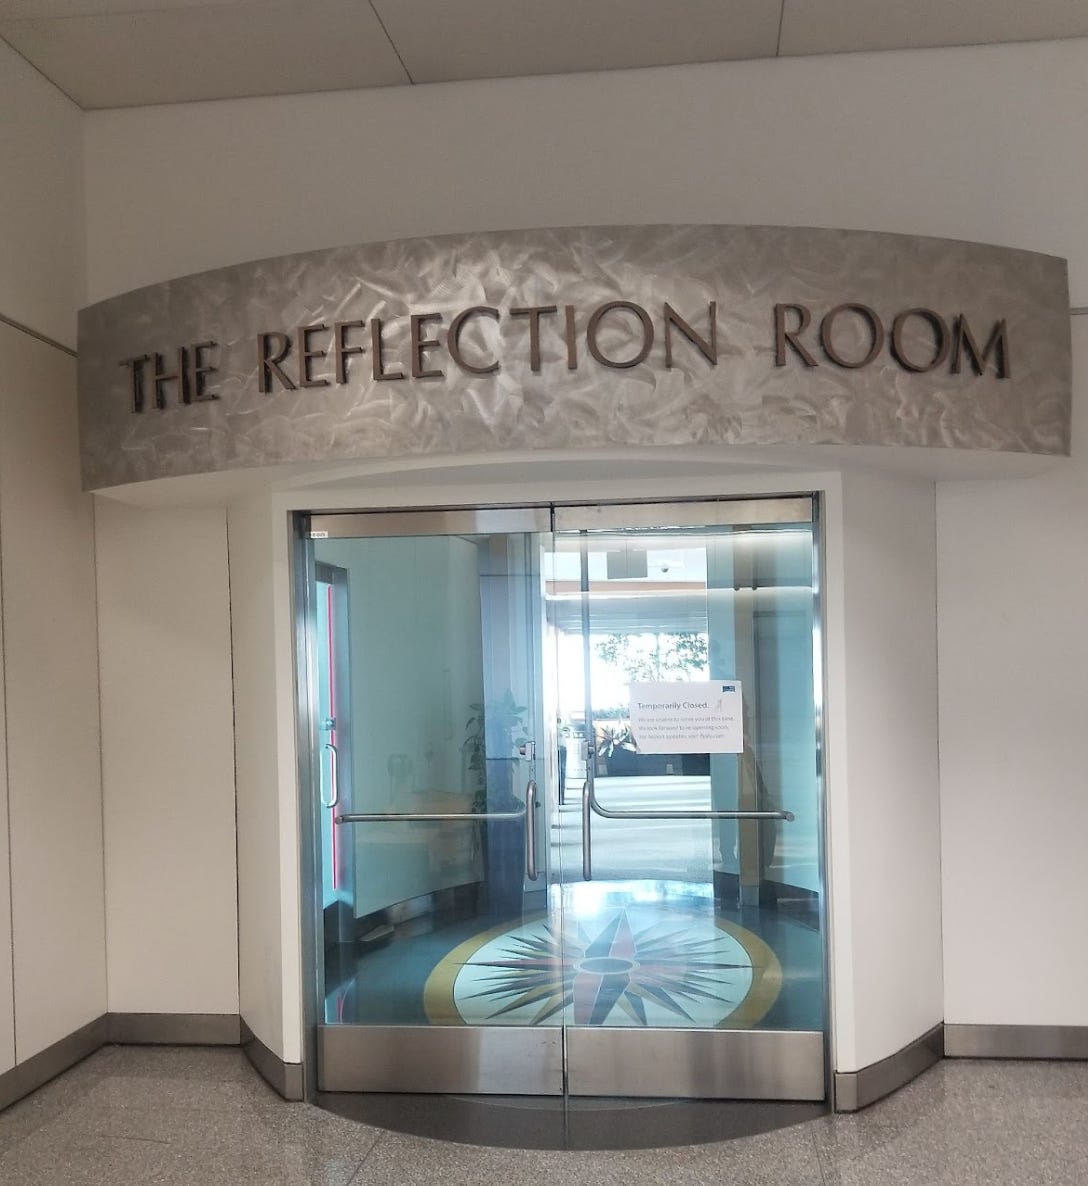 a room at sfo titled "the reflection room"